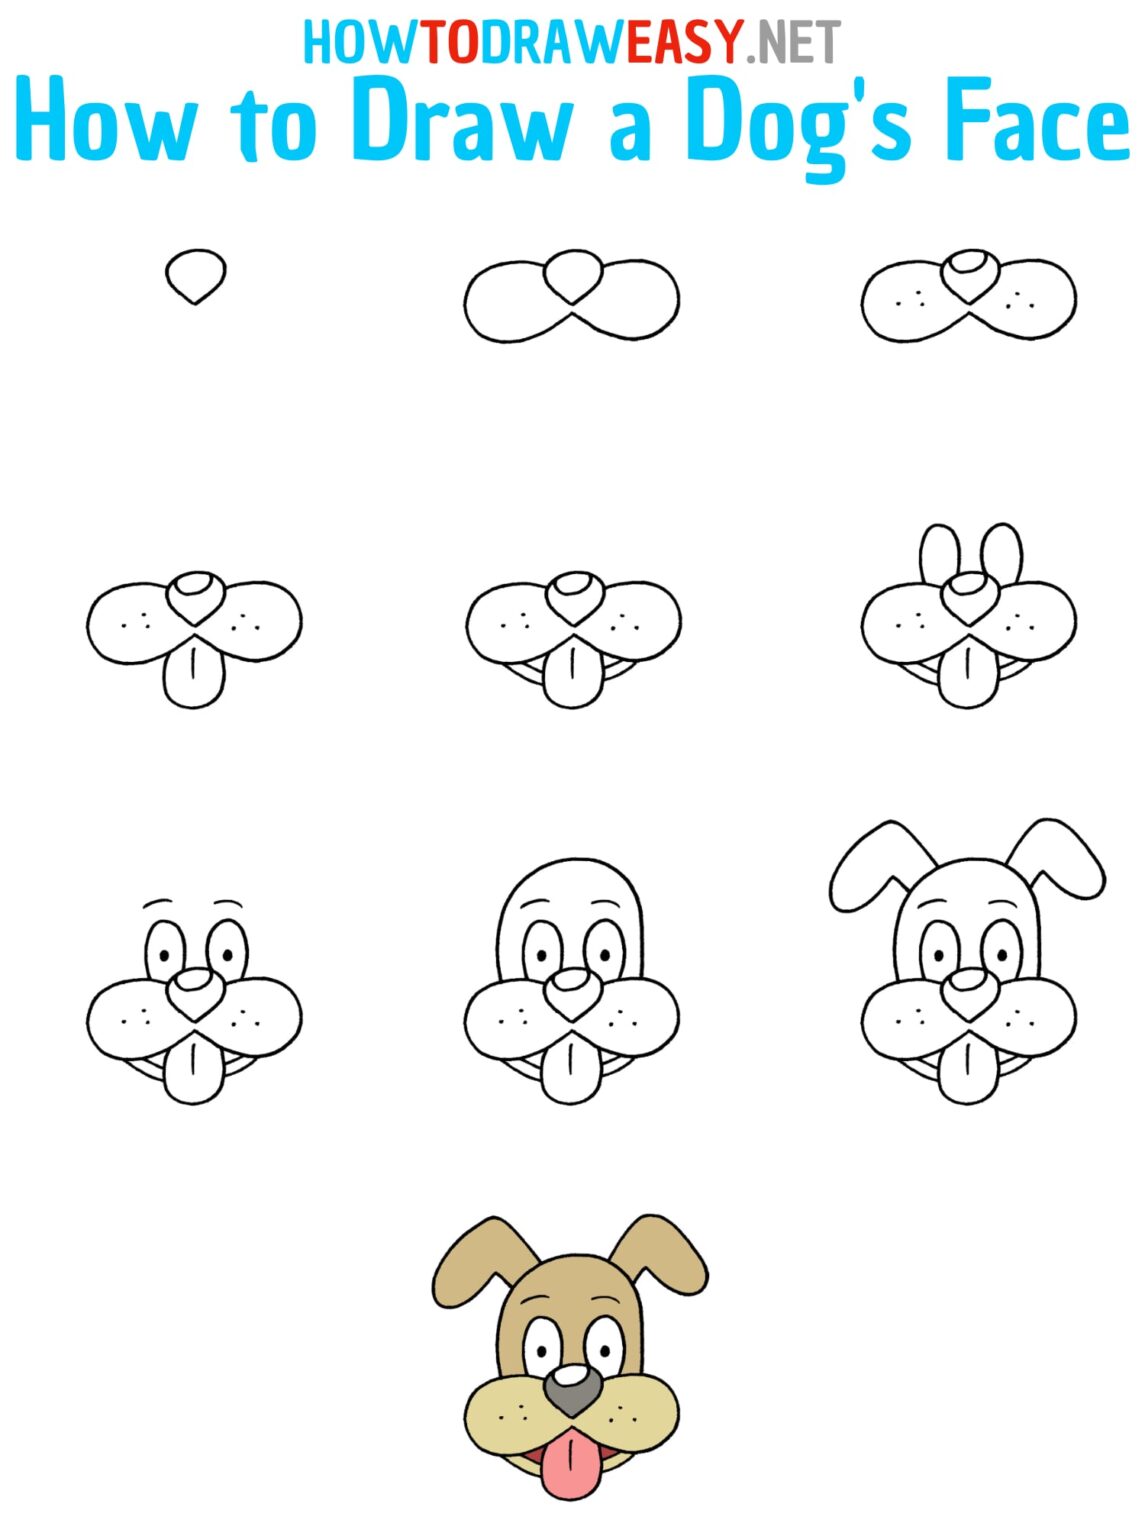 Great How To Draw A Dog Face Step By Step in the world Check it out now 